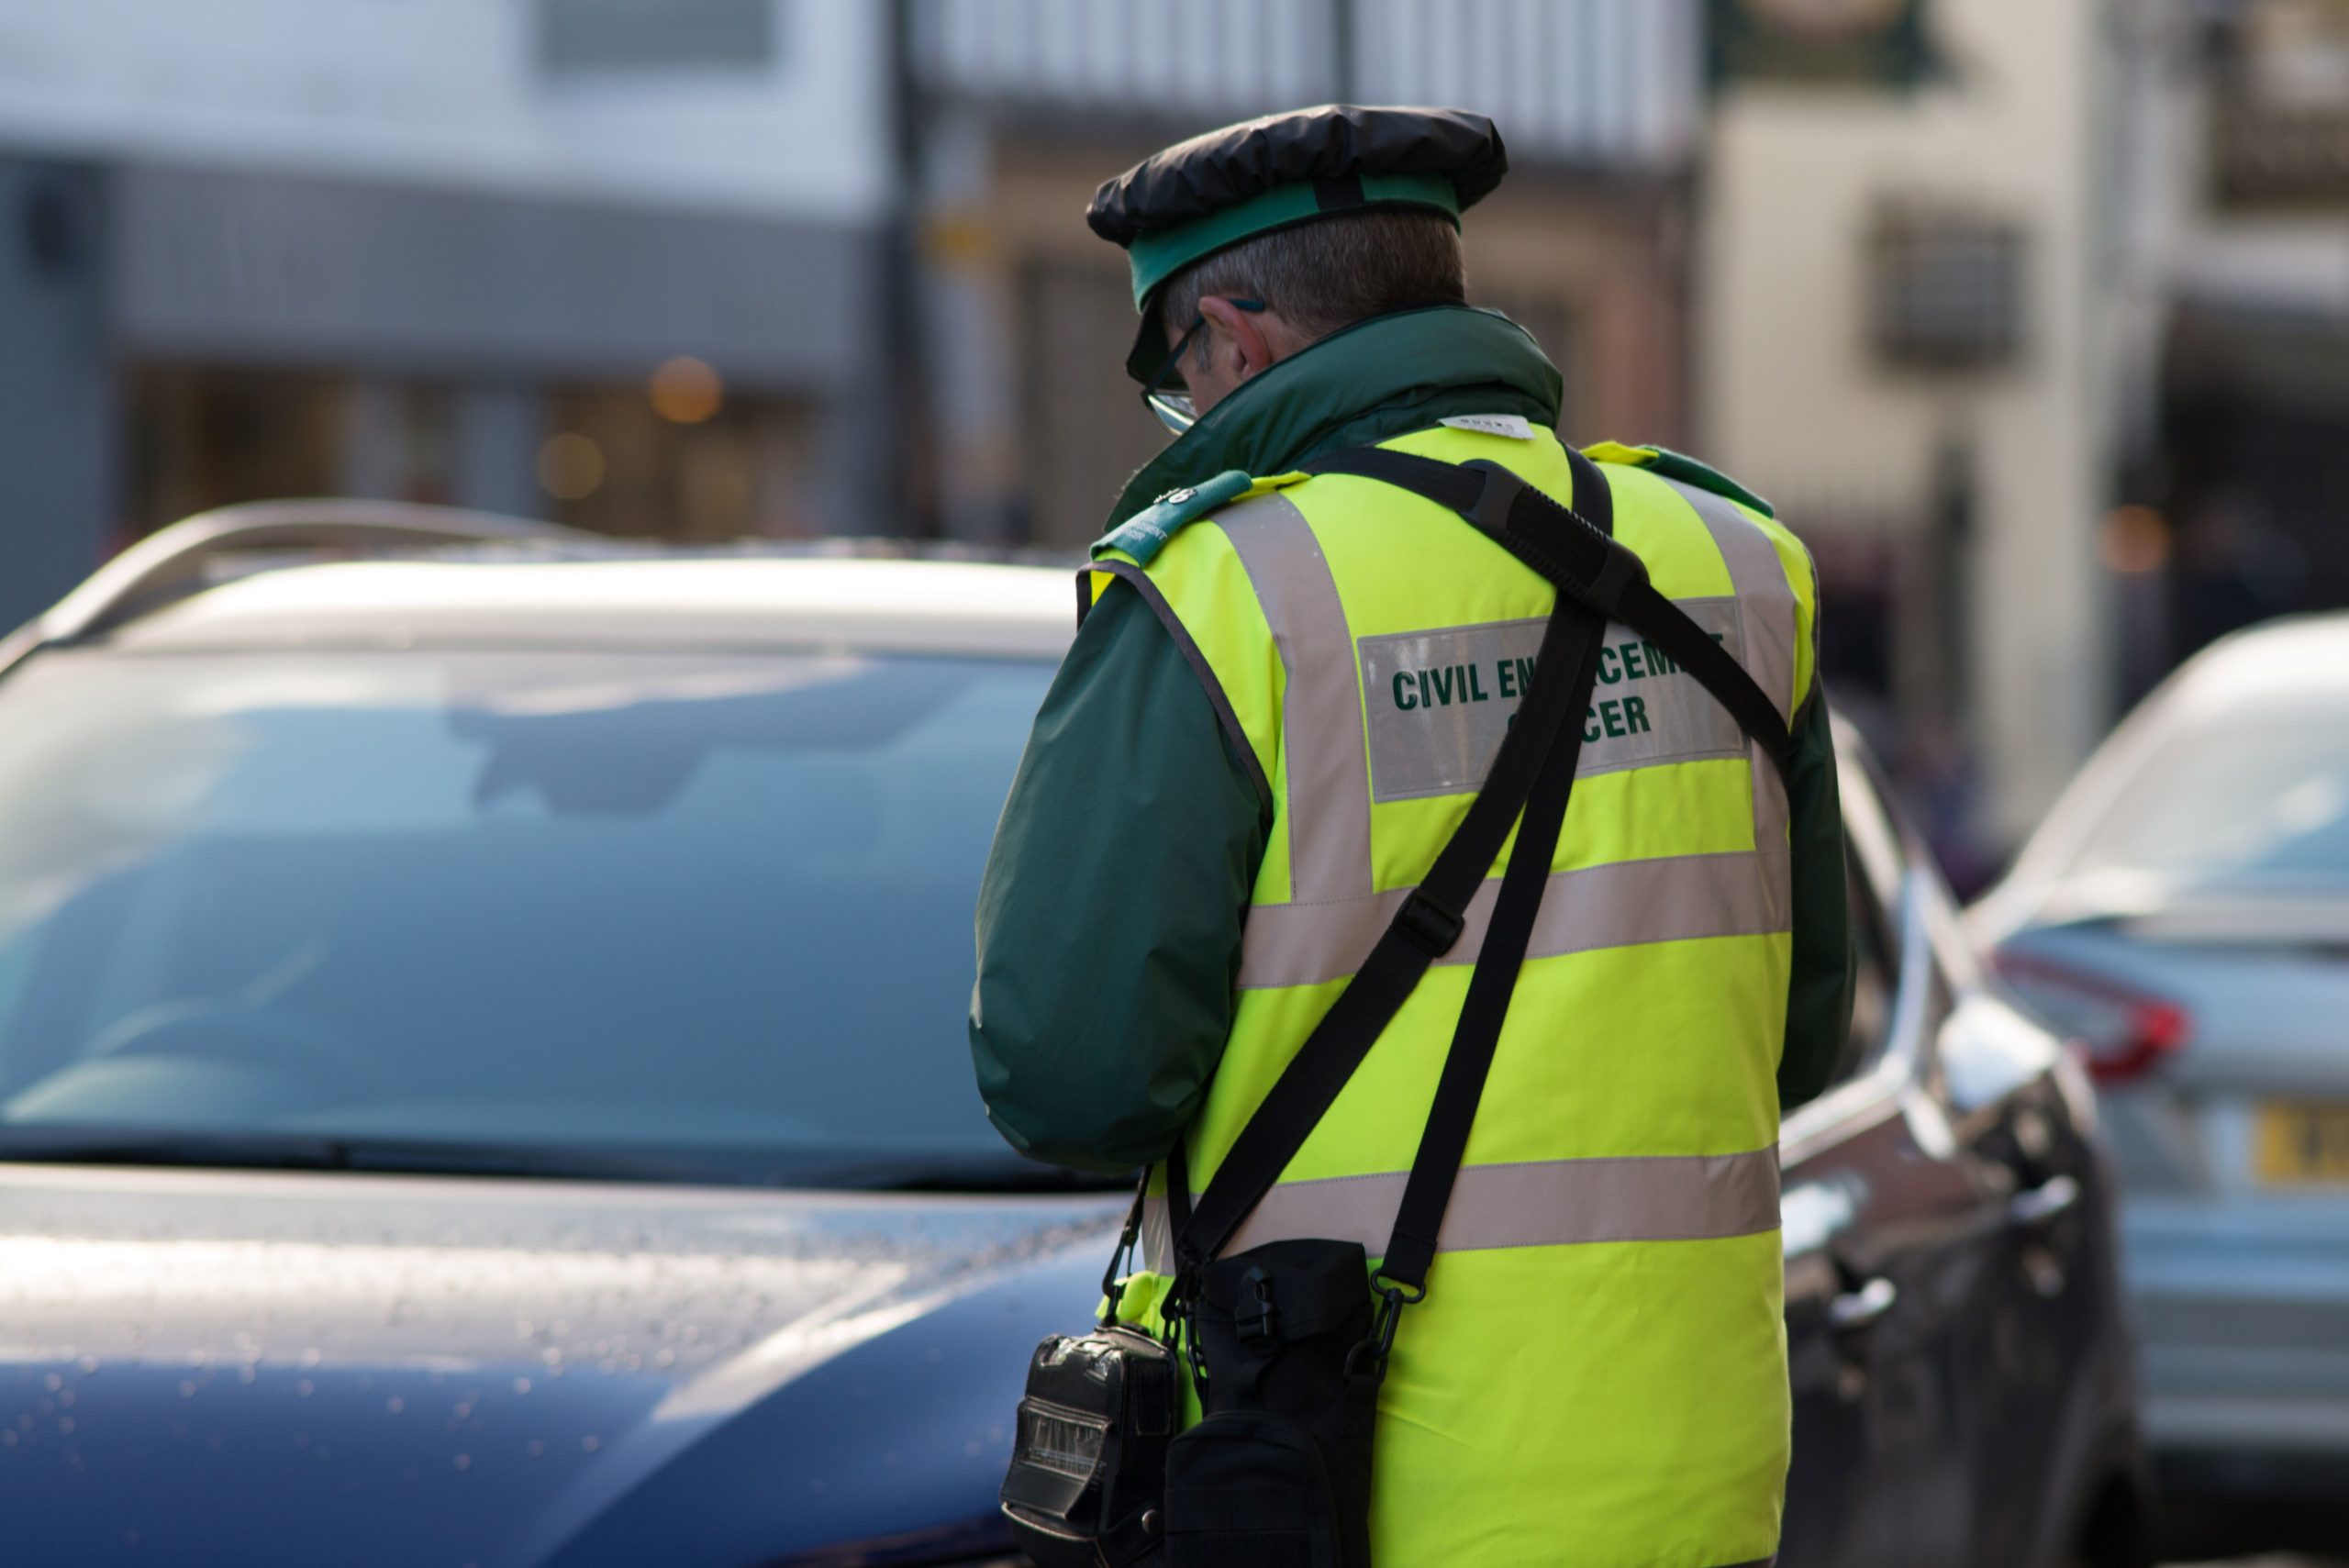 Call for Participation: Survey on the Welfare of Parking Officers